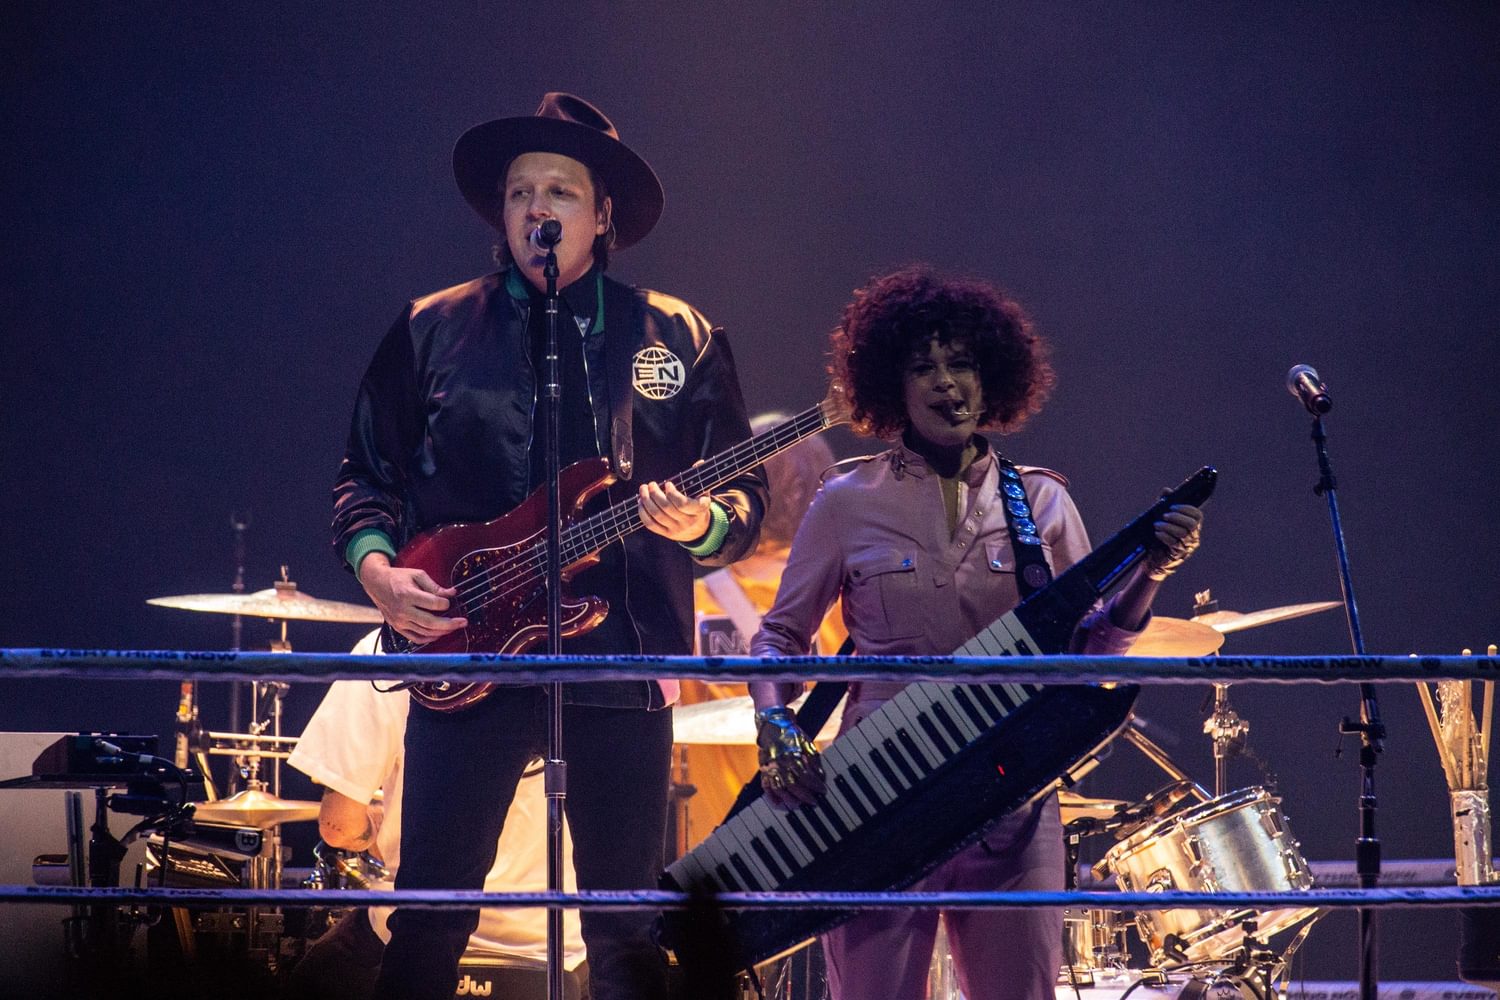 Arcade Fire’s Win Butler says he’s written “records and records” of material during lockdown